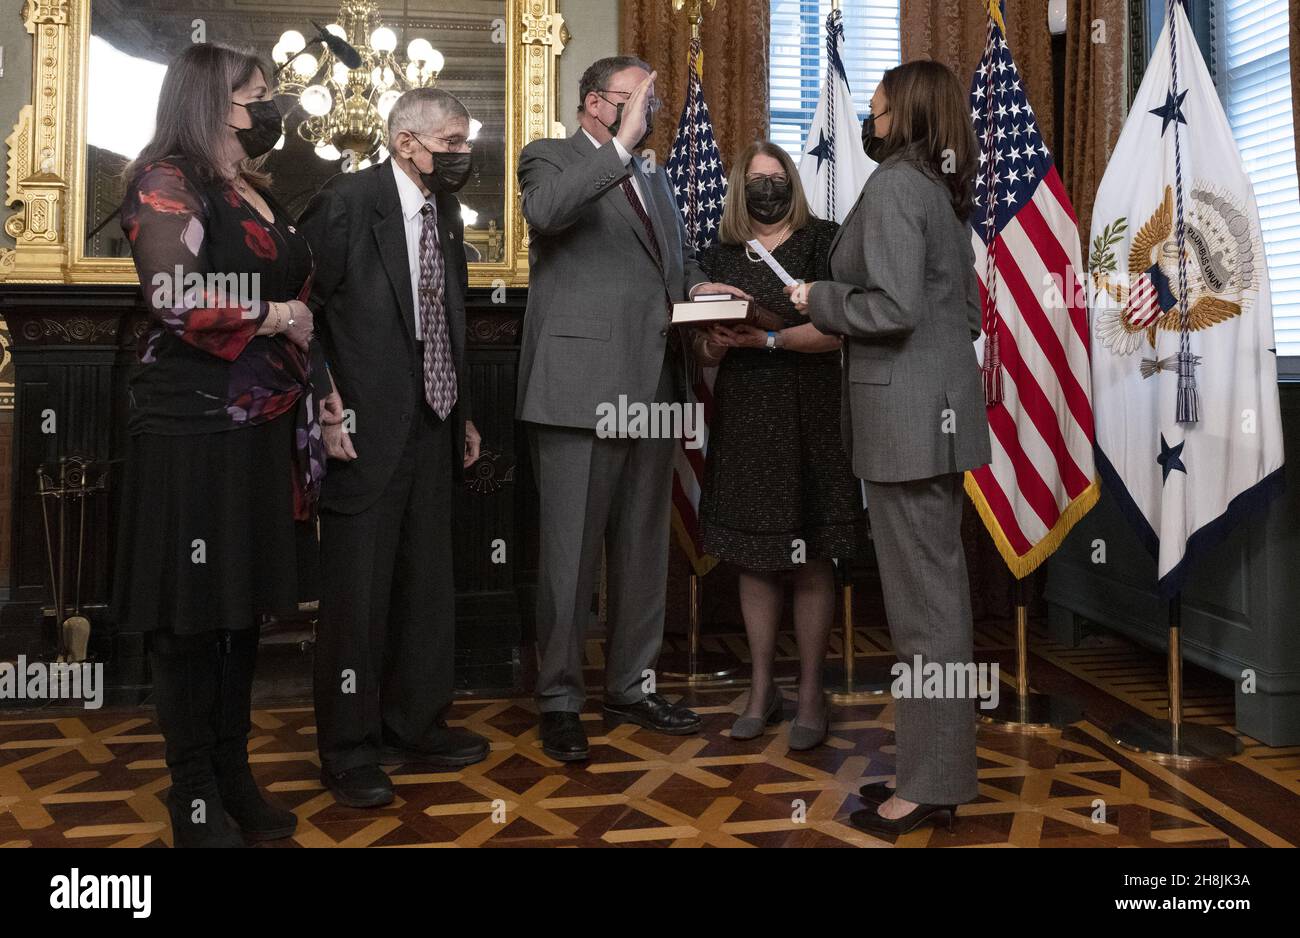 Washington, United States. 30th Nov, 2021. United States Vice President Kamala Harris, right, ceremonially administers the oath of office to David L Cohen, center, to be Ambassador Extraordinary and Plenipotentiary of the United States of America to Canada in the Vice President's Ceremonial Office in the Eisenhower Executive Office Building in Washington, DC on Tuesday, November 30, 2021. From left to right: Nancy S. Cohen, sister Arthur S. Cohen, father Ambassador Cohen Rhonda R. Cohen, spouse and VP Harris. Photo by Ron Sachs/UPI Credit: UPI/Alamy Live News Stock Photo